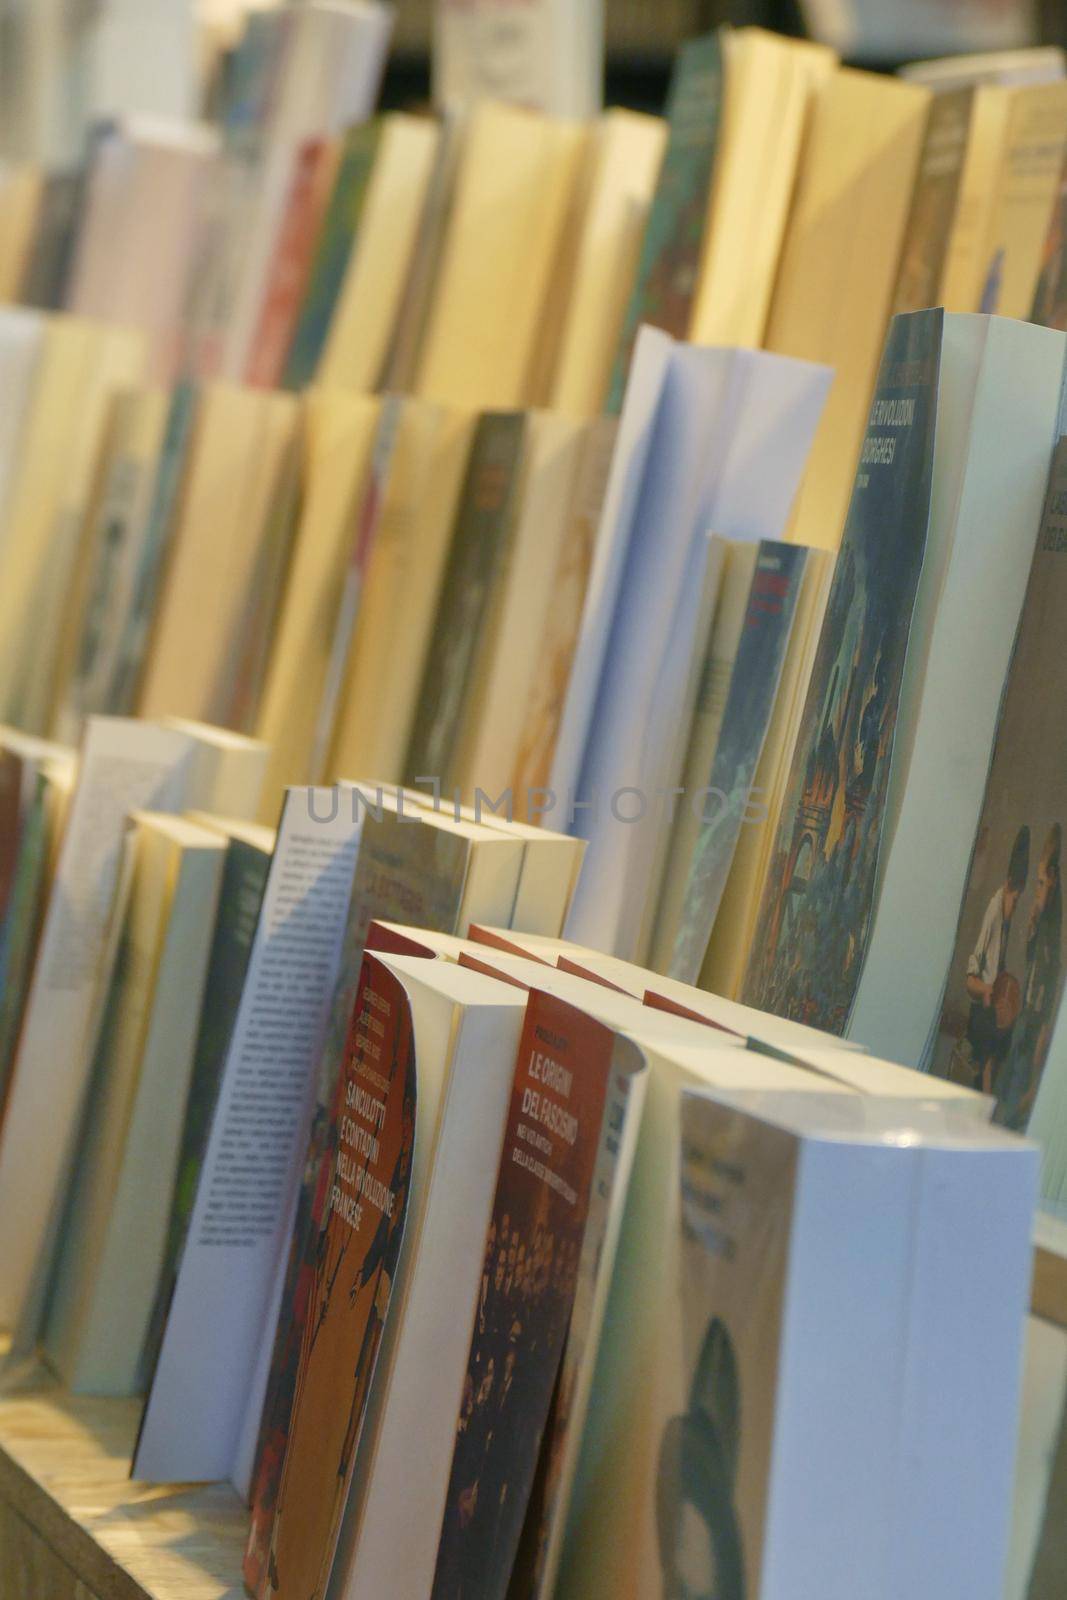 Perspective view of book rows in book fair selective focus Turin Italy May 10 2019 by lemar